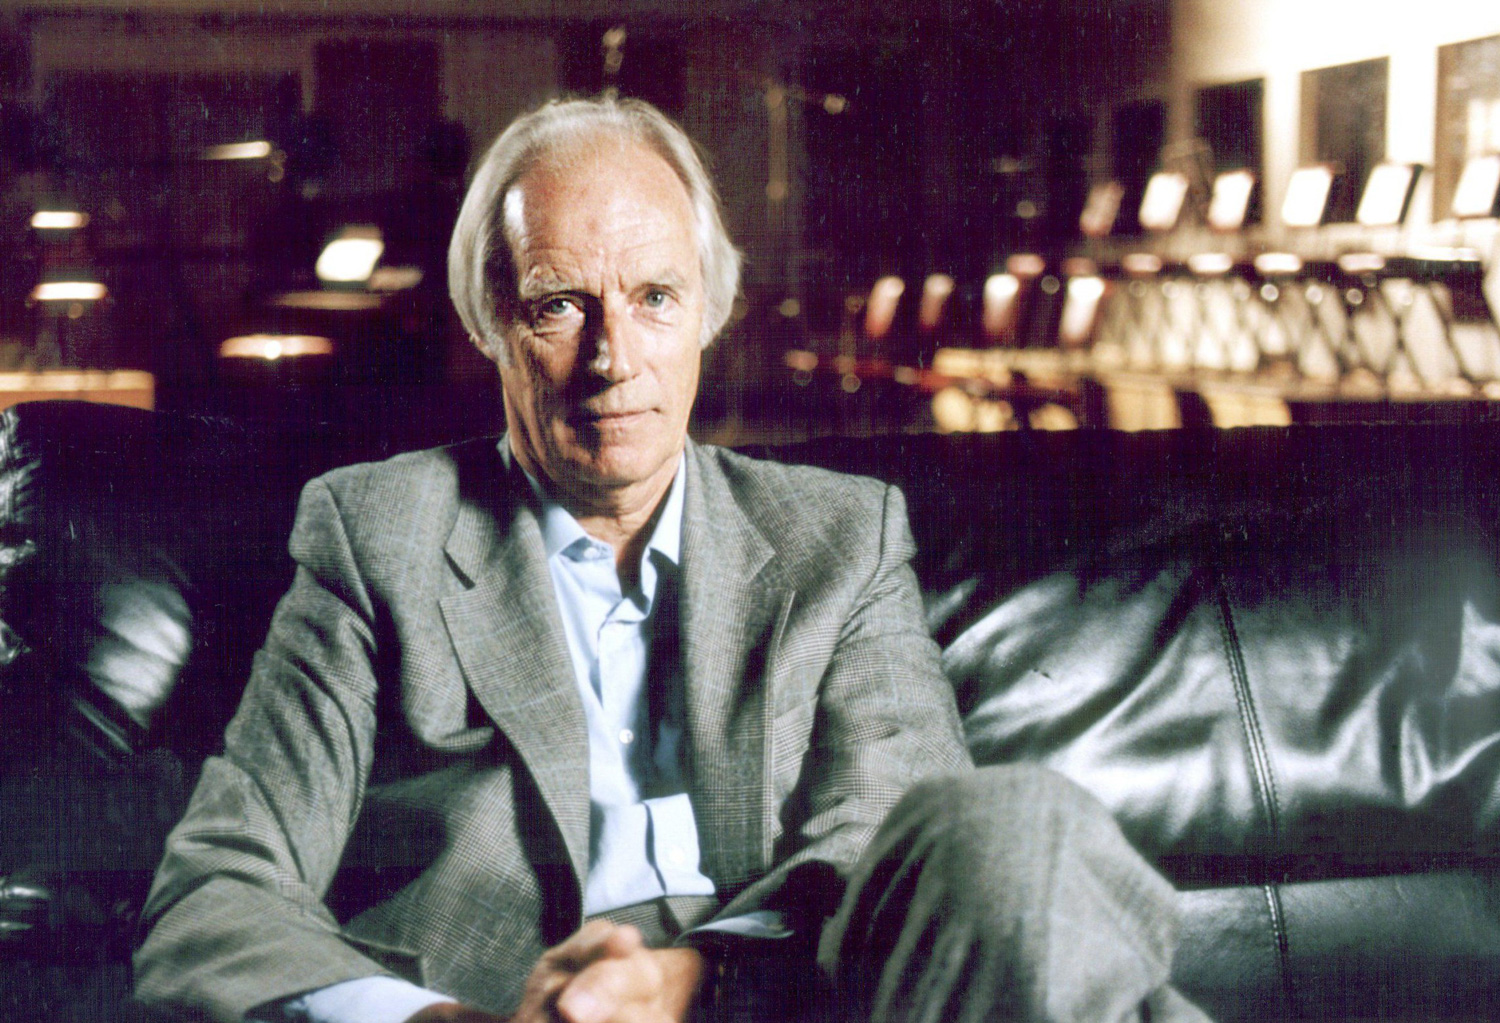 Remembering George Martin, the “fifth” Beatle